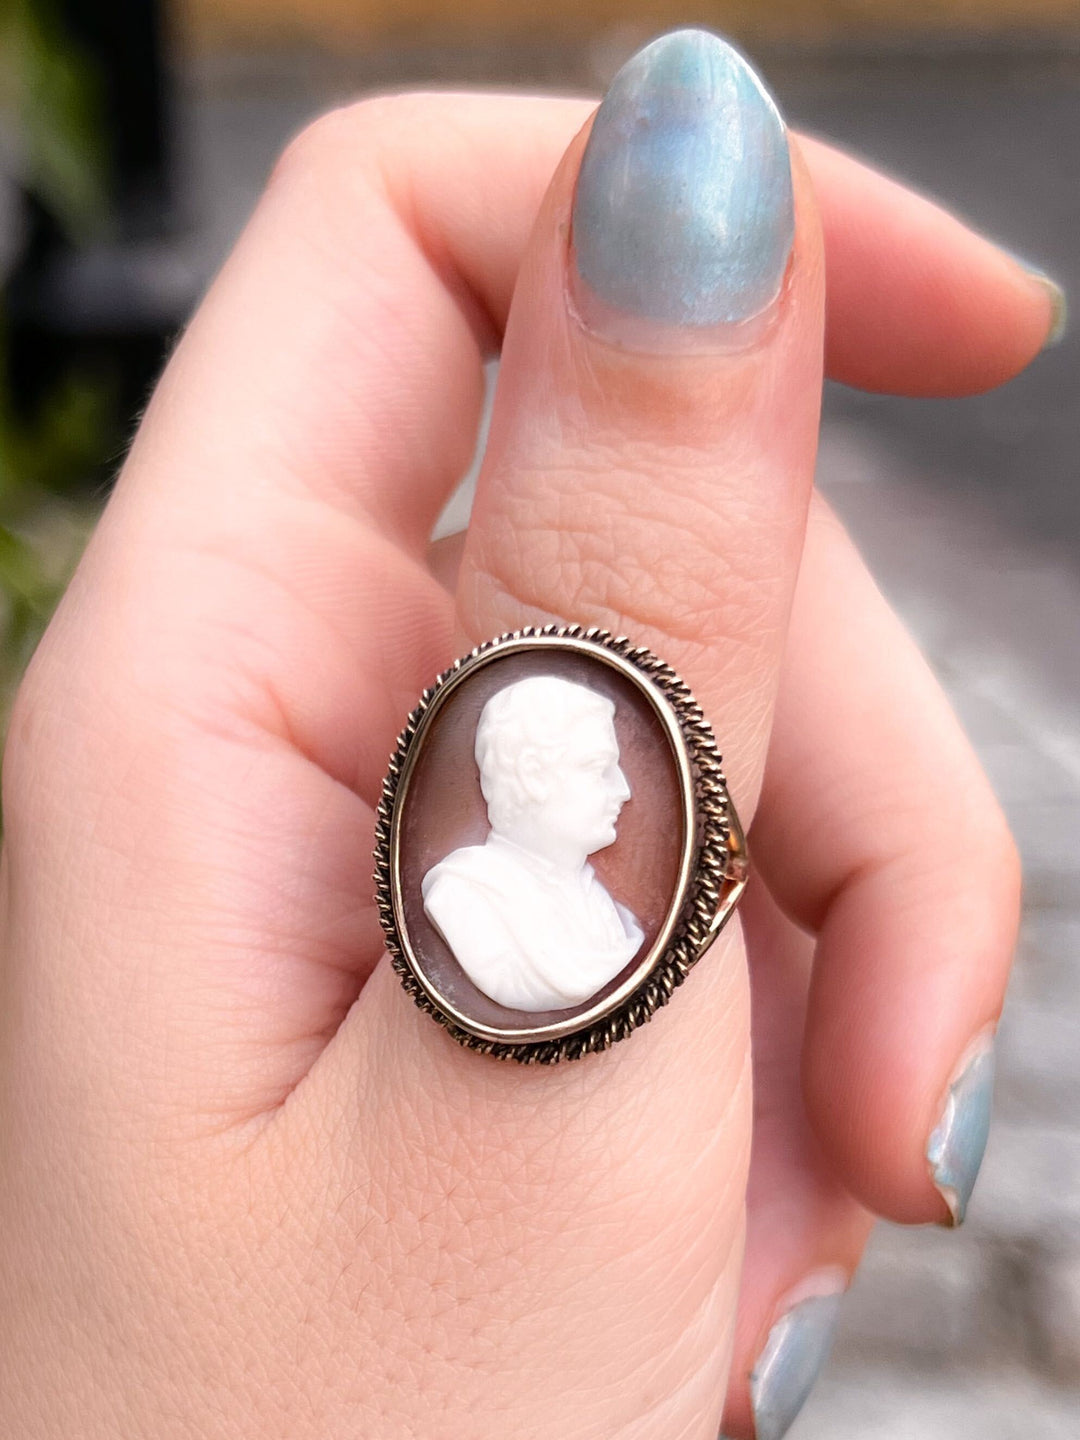 Extremely Rare 19th Century Cameo Ring of Charles X of France in 14k